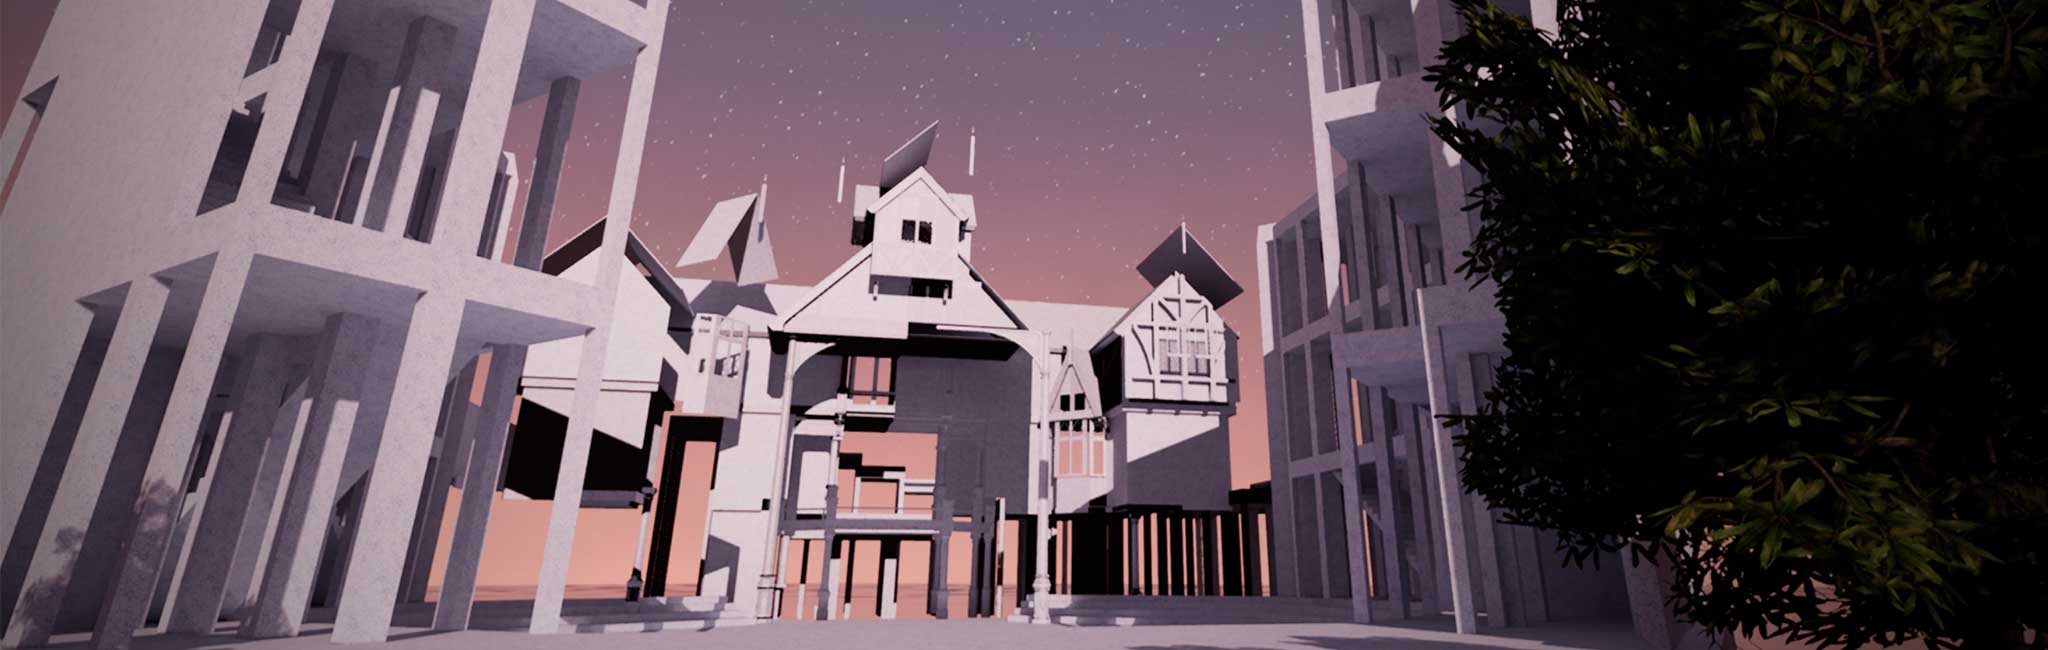 Quills Fest VR world with buildings.